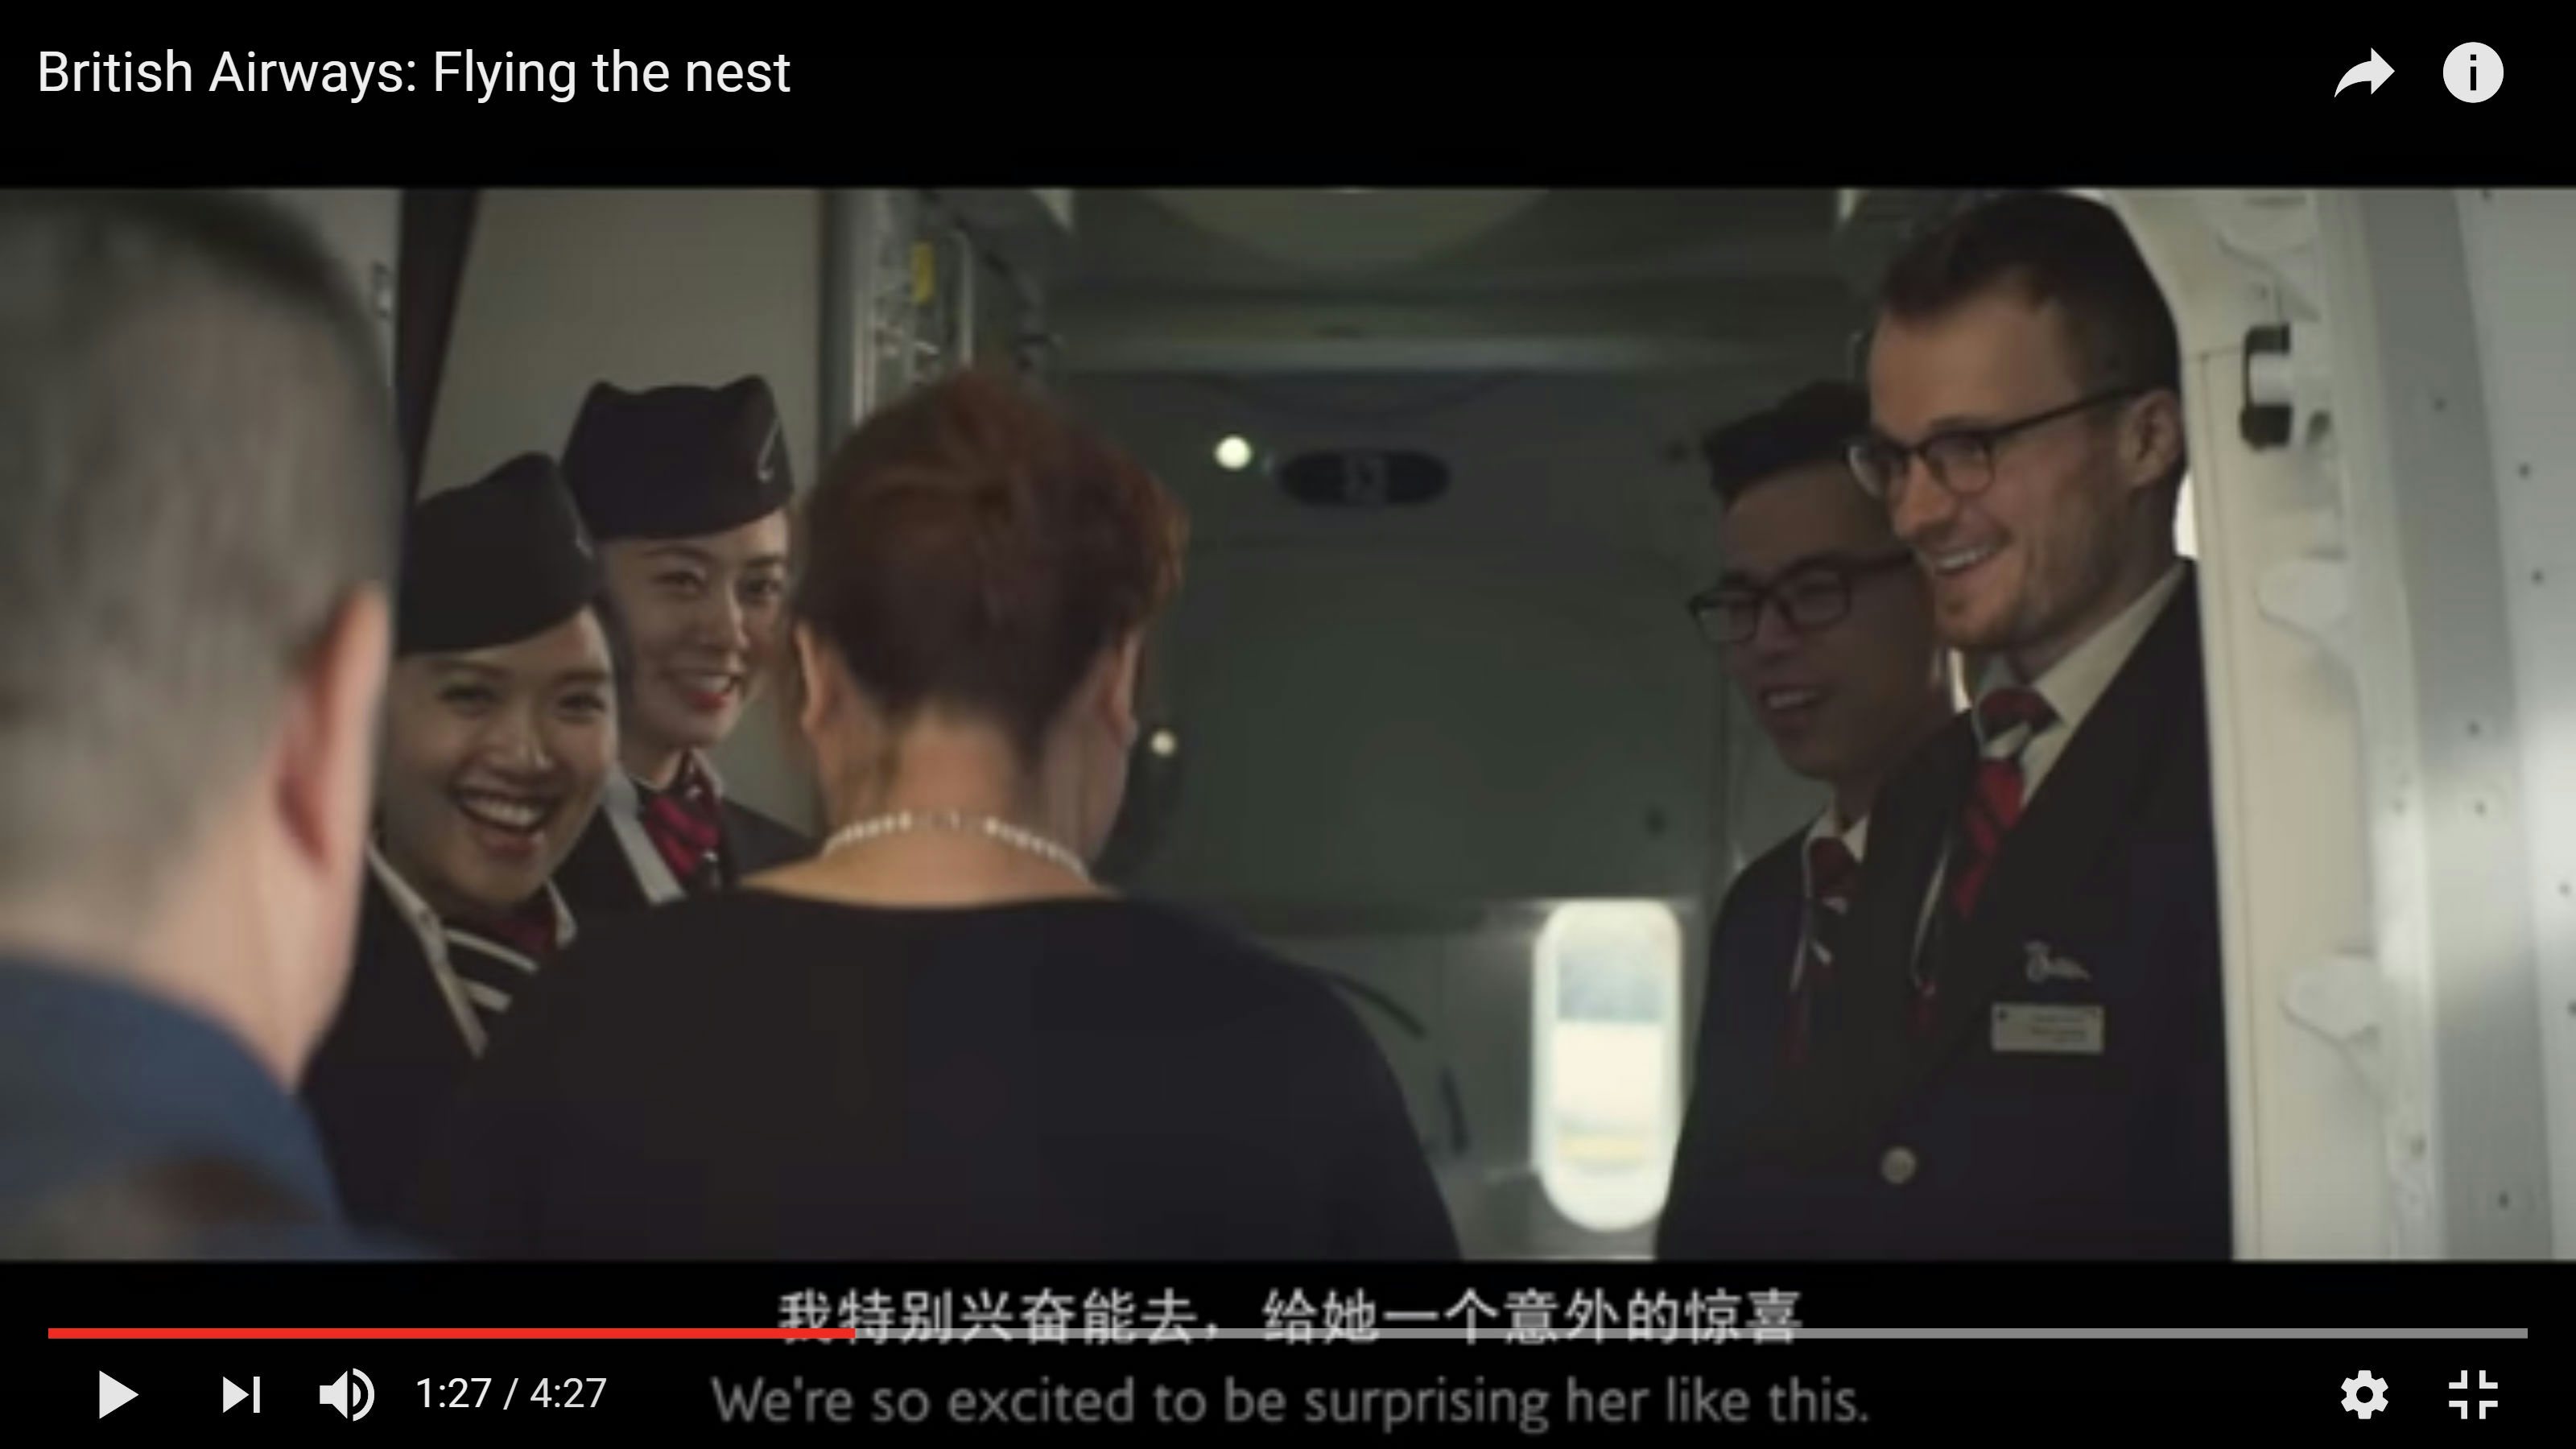 A screenshot of the British Airways video ad campaign to spread the news about the airline's new Chinese flight attendants. 